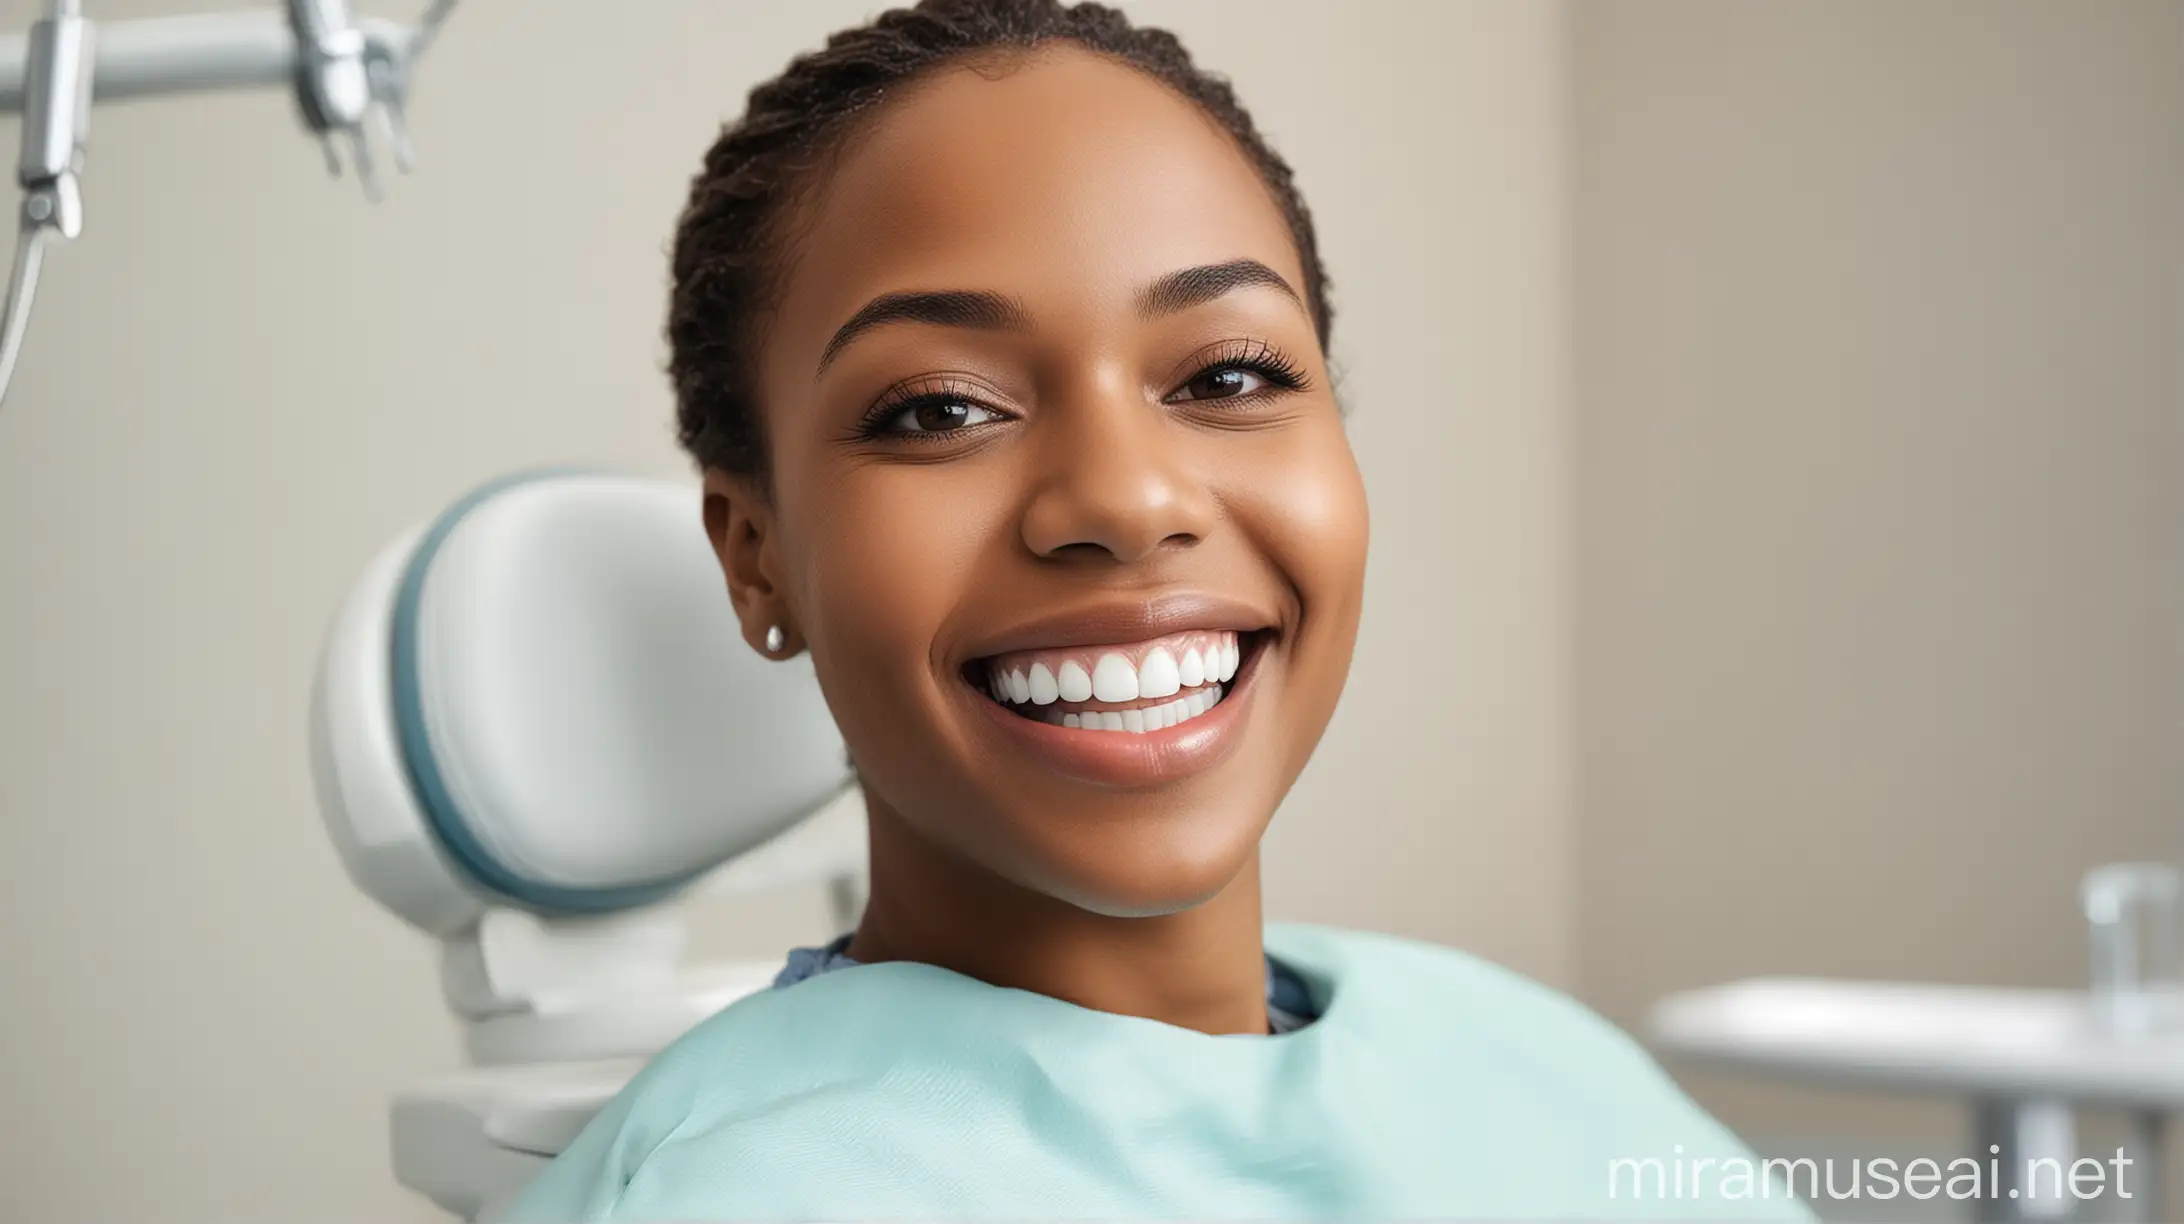 Happy African American Patient Smiling in Dentist Chair with White Teeth